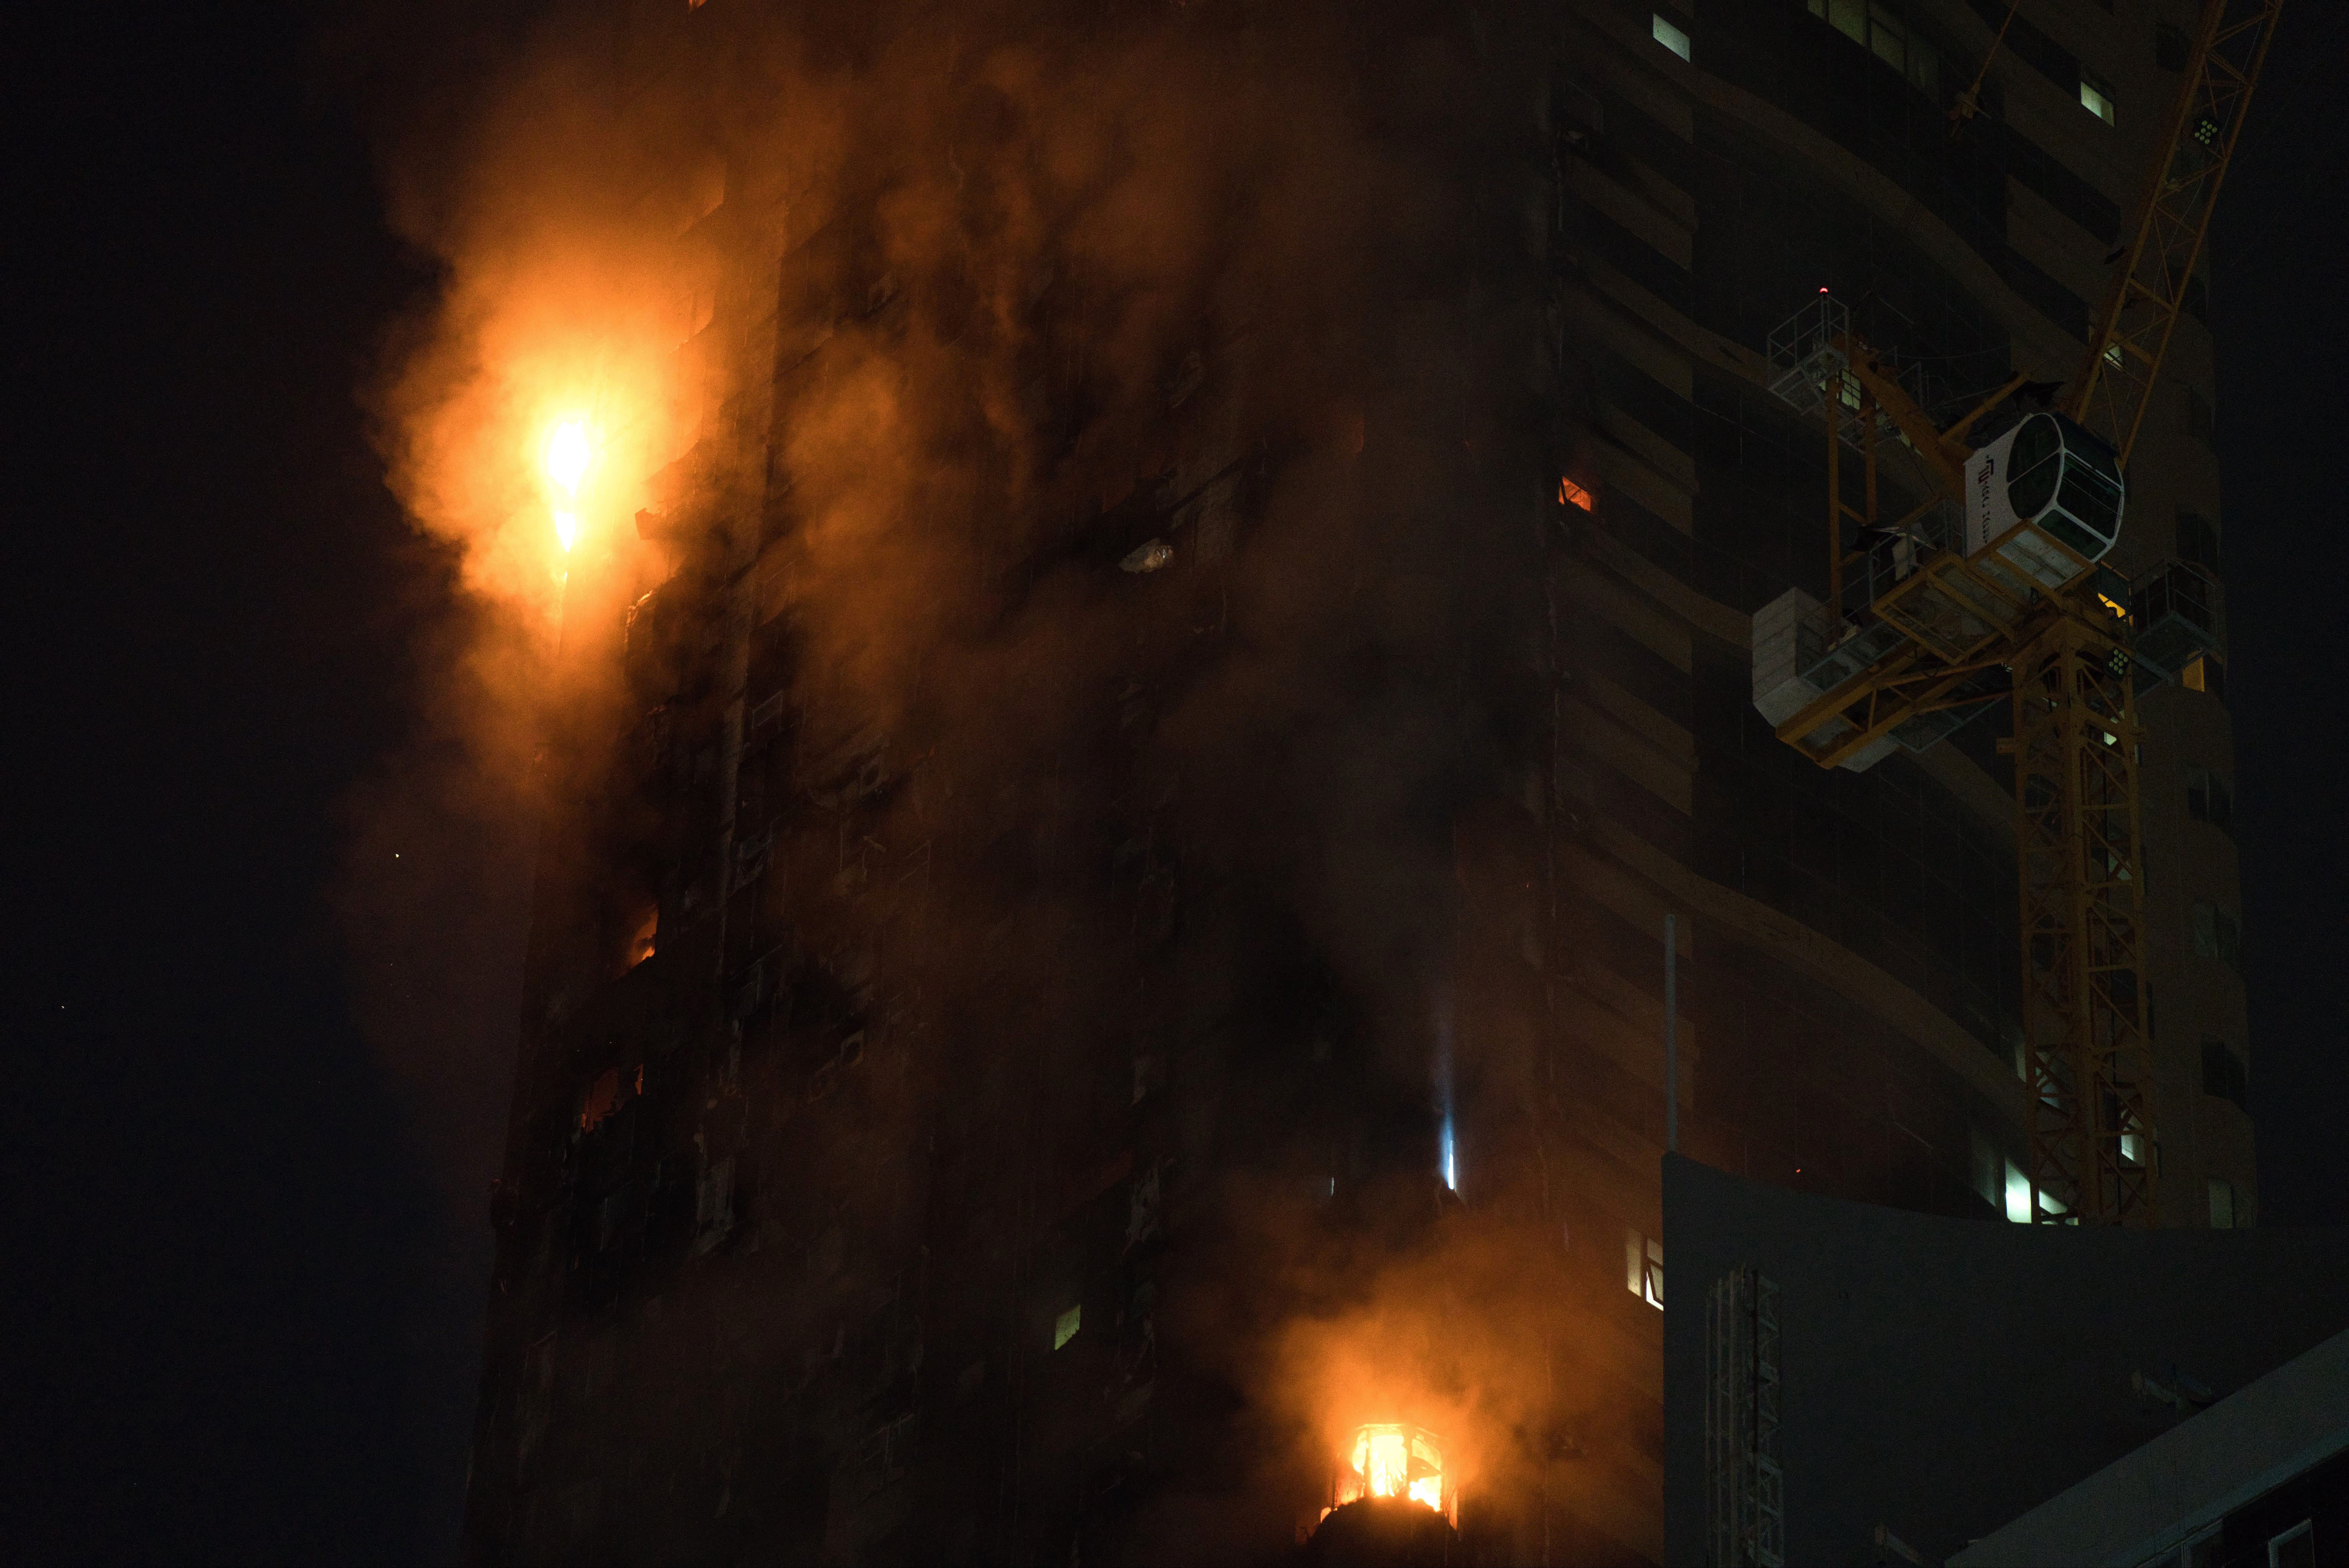 A fire burns on the side of a high-rise building in Sharjah, United Arab Emirates, Tuesday, May 5, 2020. A high-rise tower caught fire Tuesday in the United Arab Emirates and authorities said it wasn't immediately clear what caused the blaze. (AP Photo/Jon Gambrell)